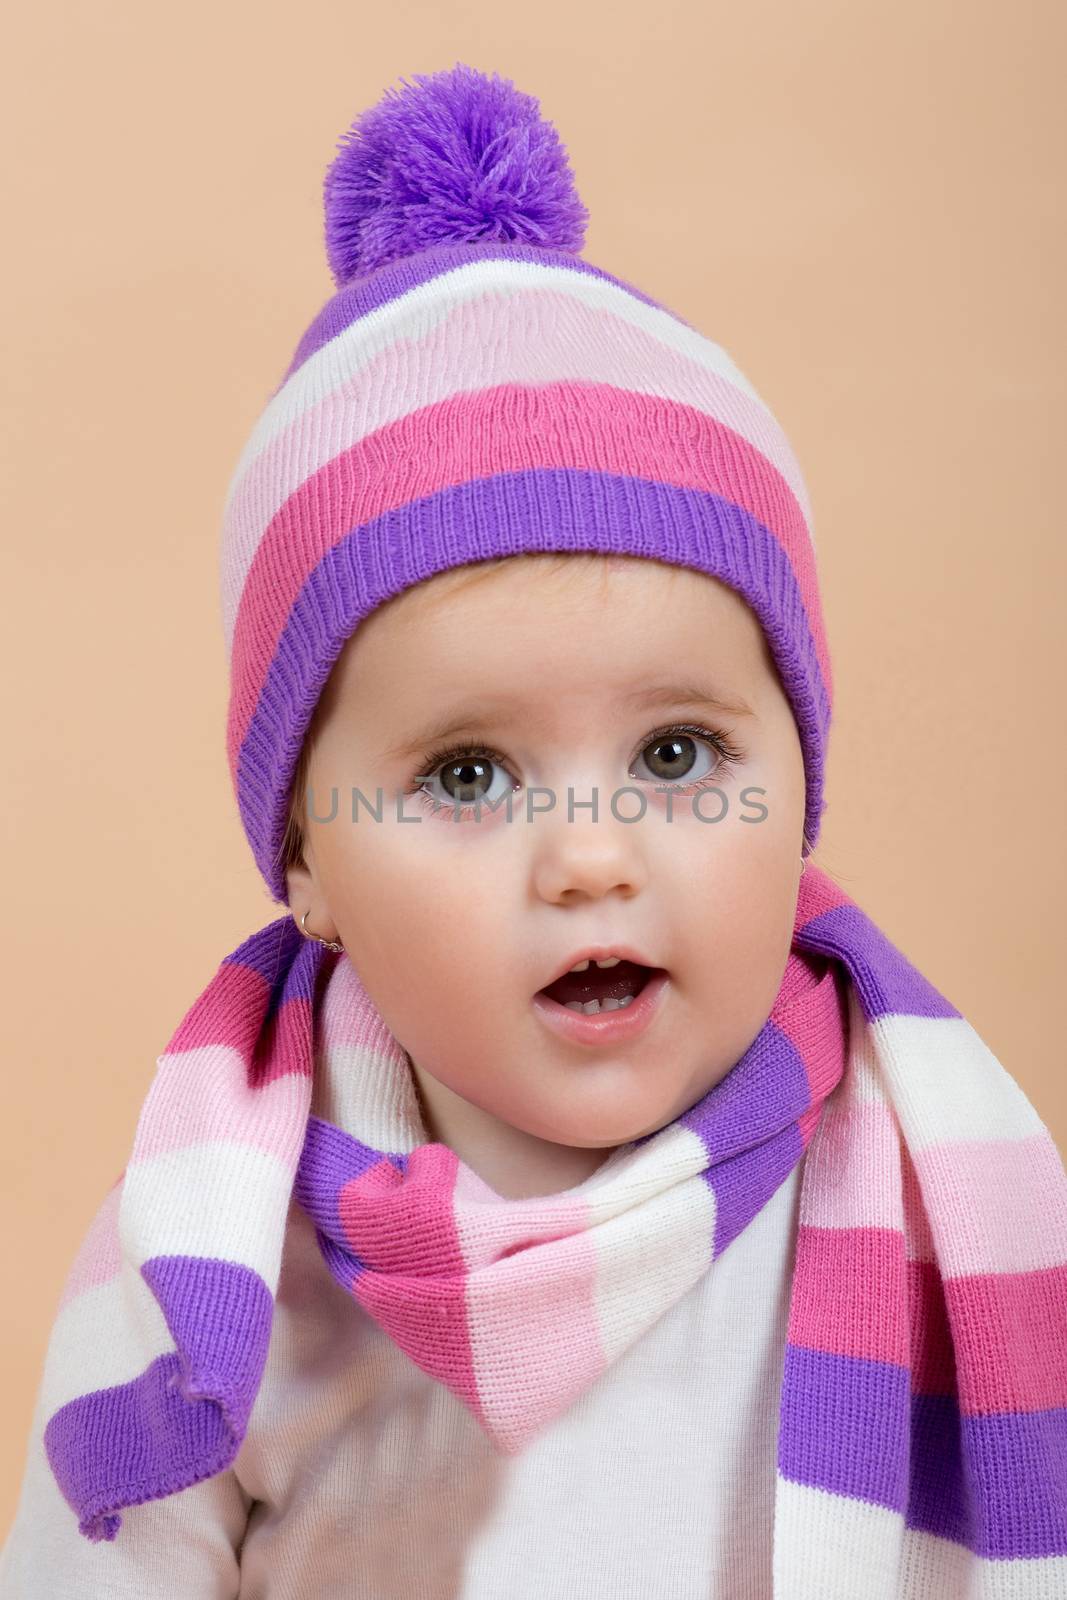 portrait of young cute baby with winter cap and scarf on beige background